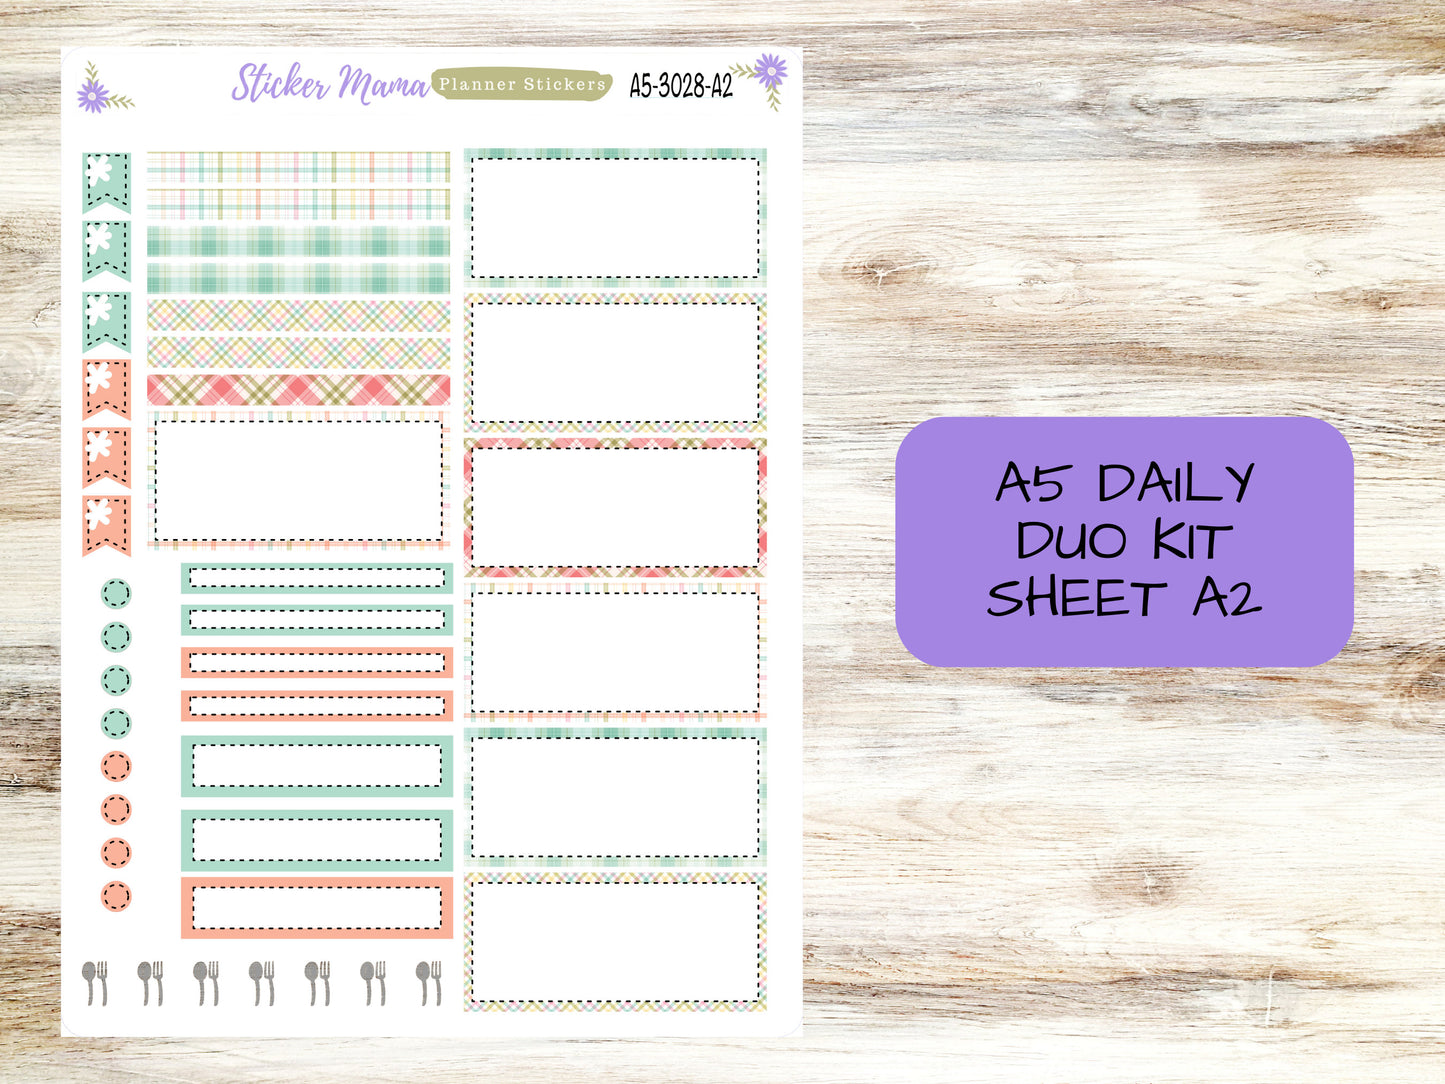 A5-DAILY DUO-Kit #3028 || Easter Spring Plaid || Planner Stickers - Daily Duo A5 Planner - Daily Duo Stickers - Daily Planner